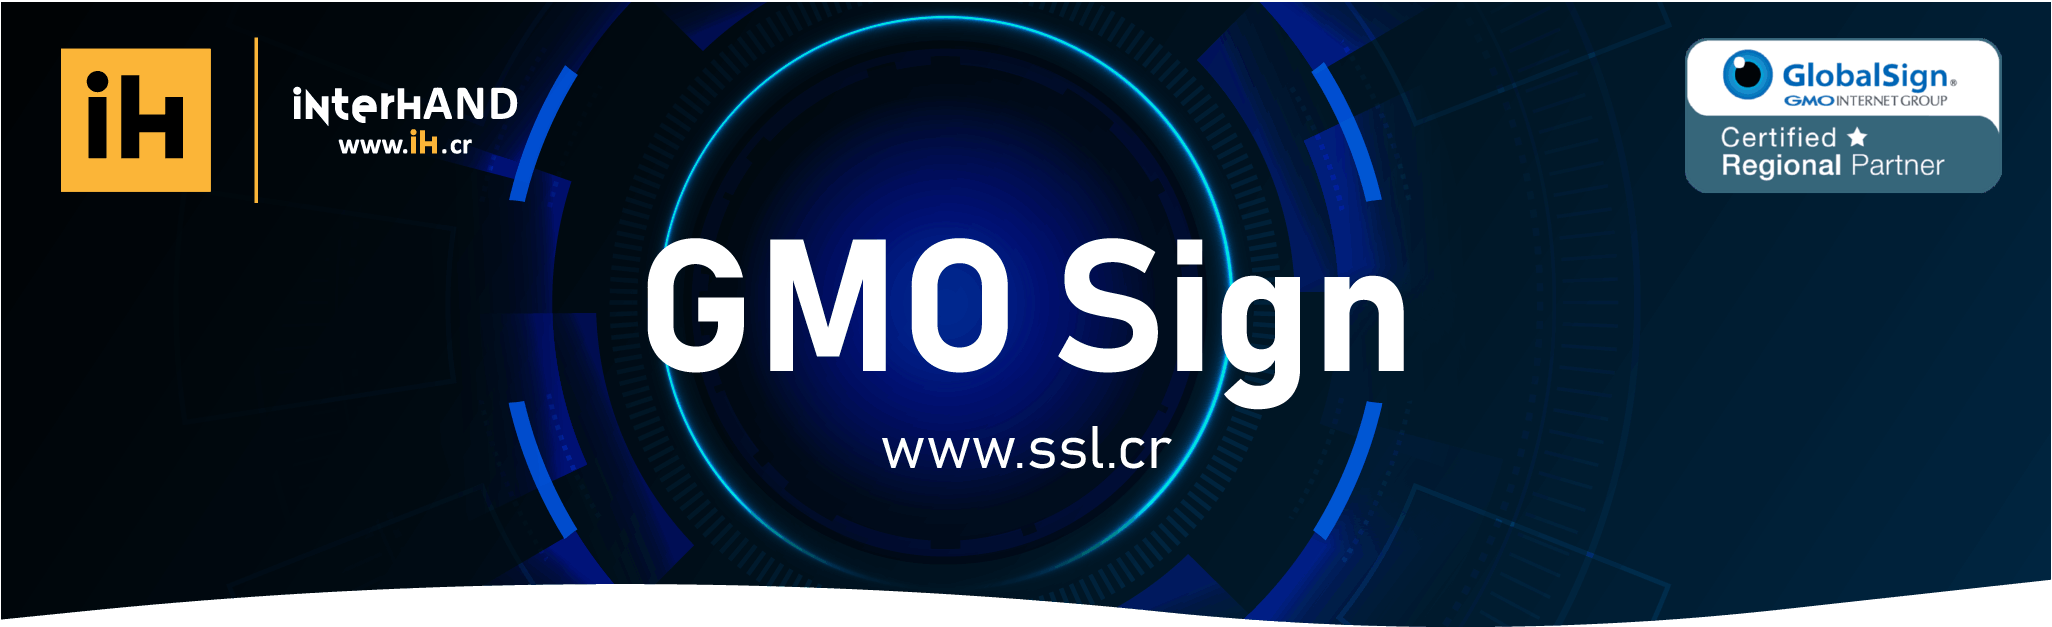 GMO Sign GlobalSign / InteHAND S. A.